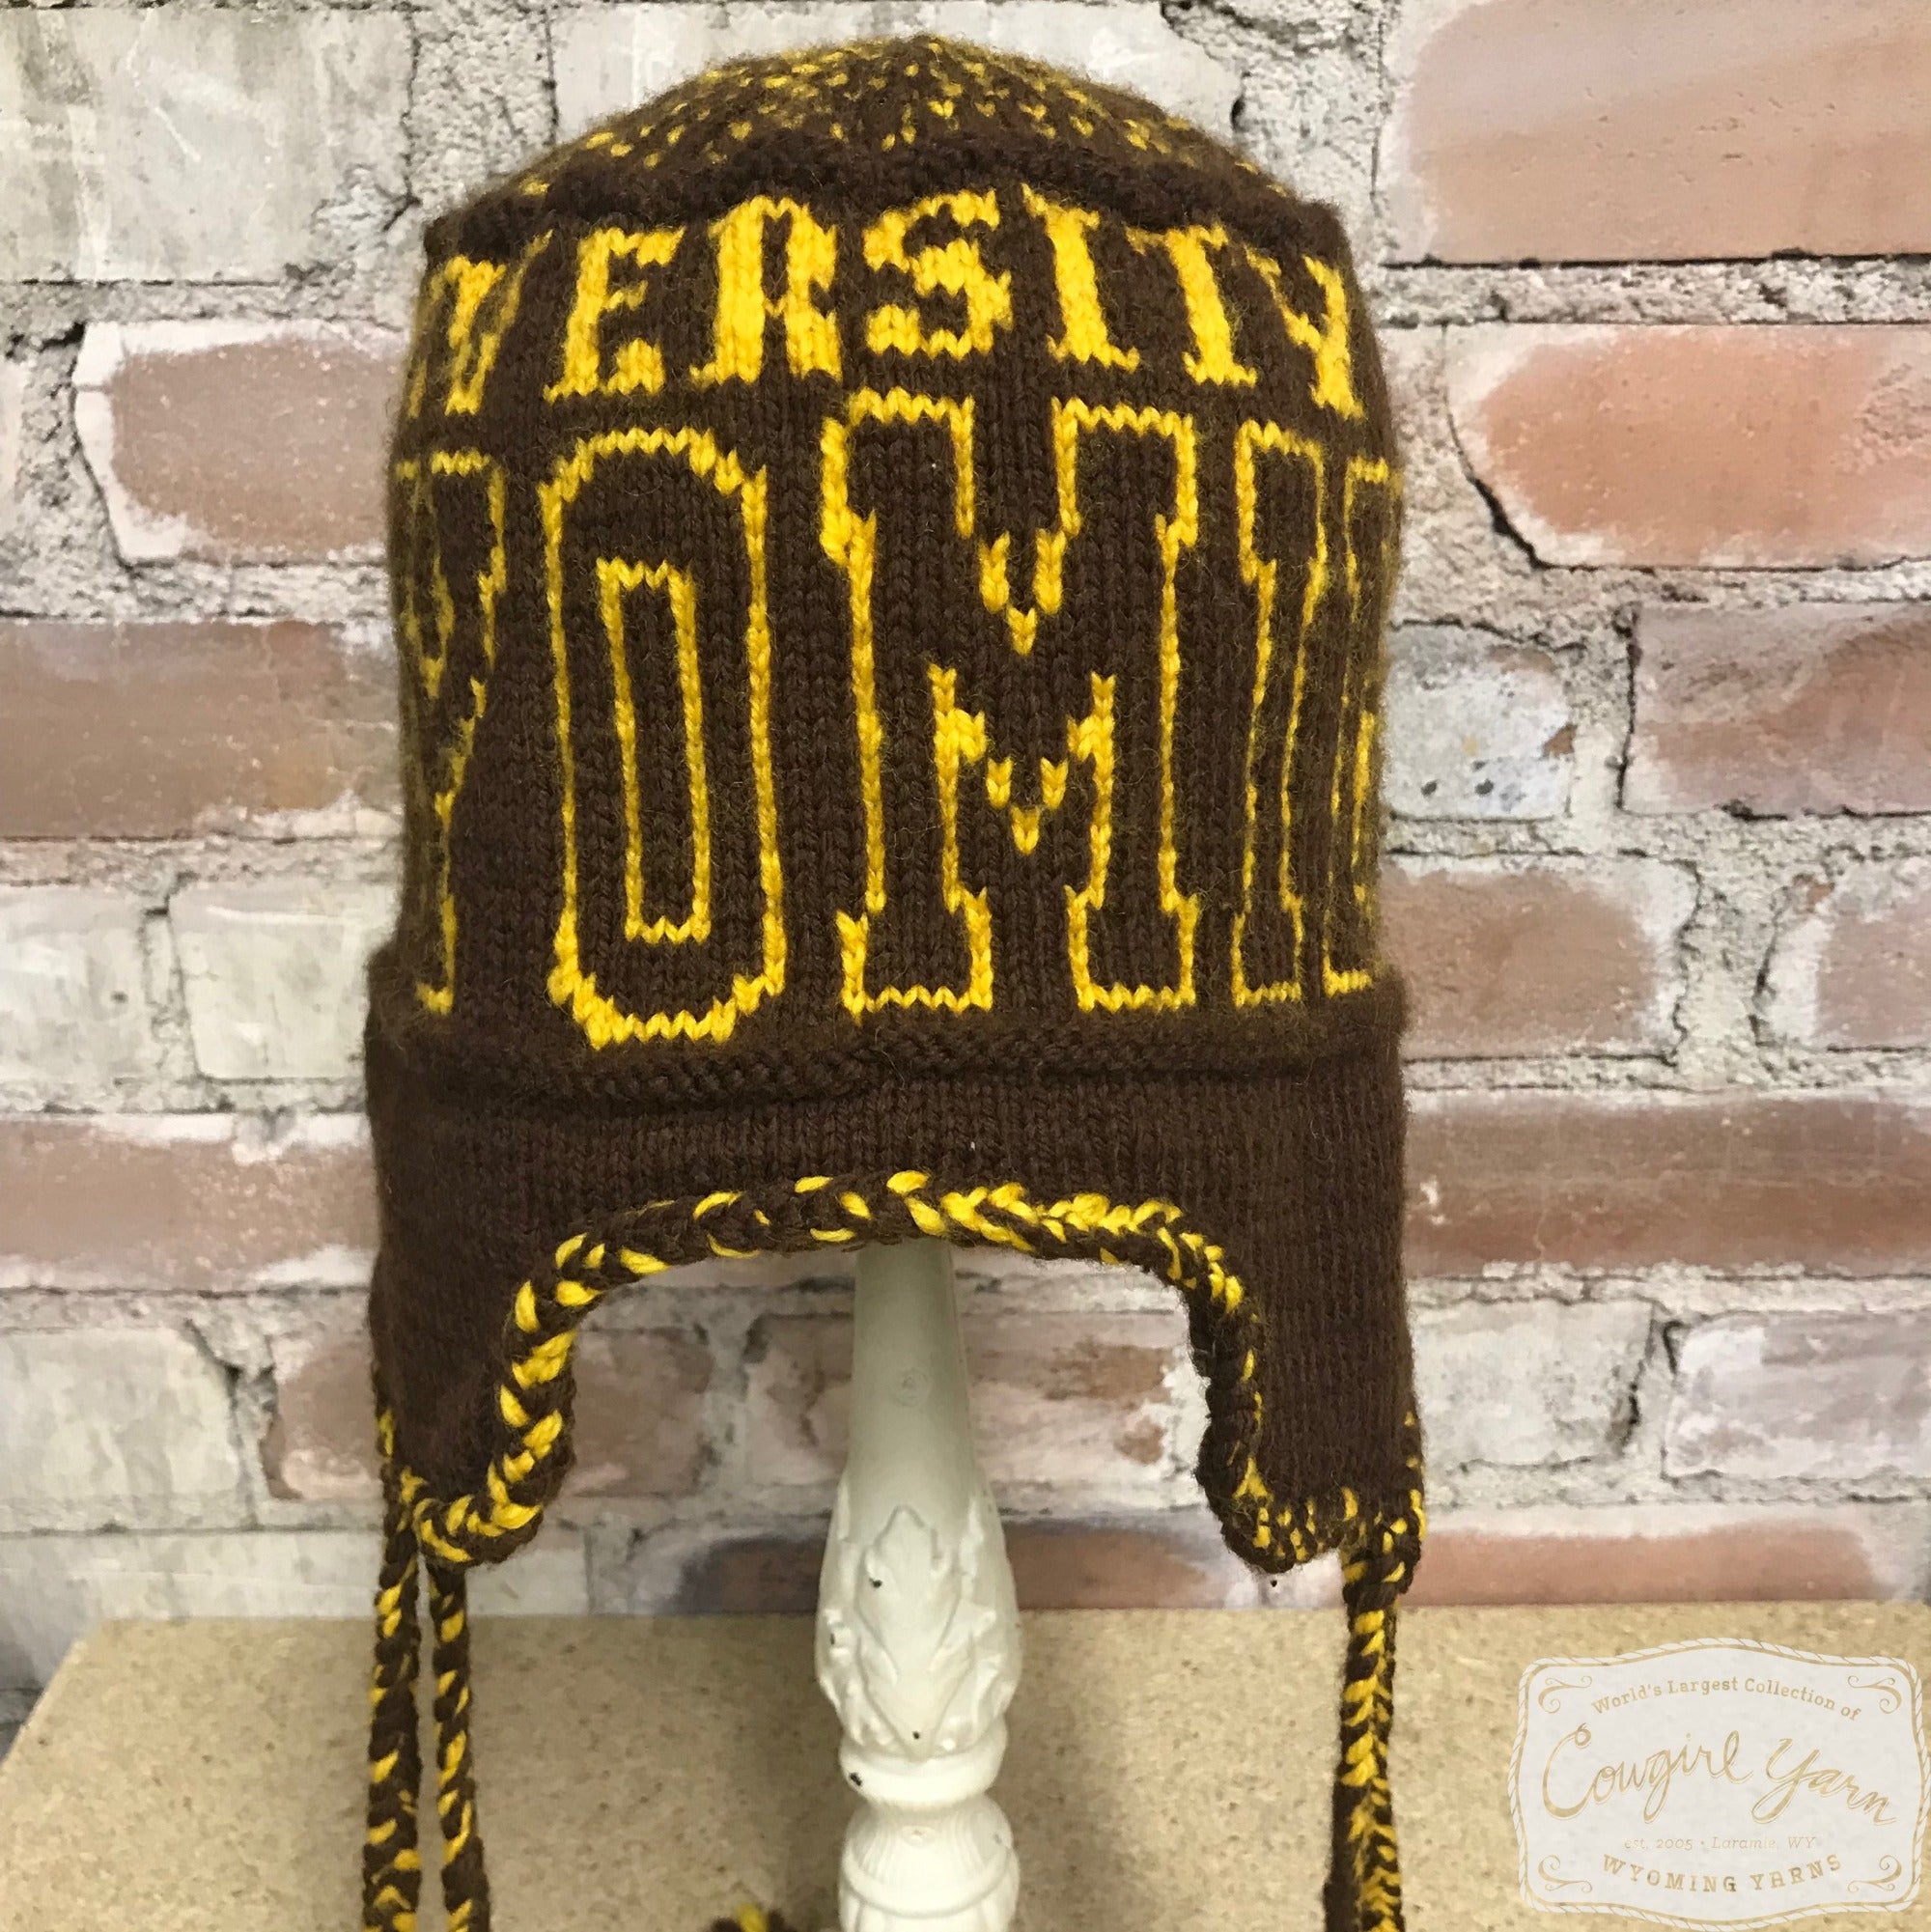 A brown knitted ski hat with the words University of Wyoming in gold styled against a brick wall.